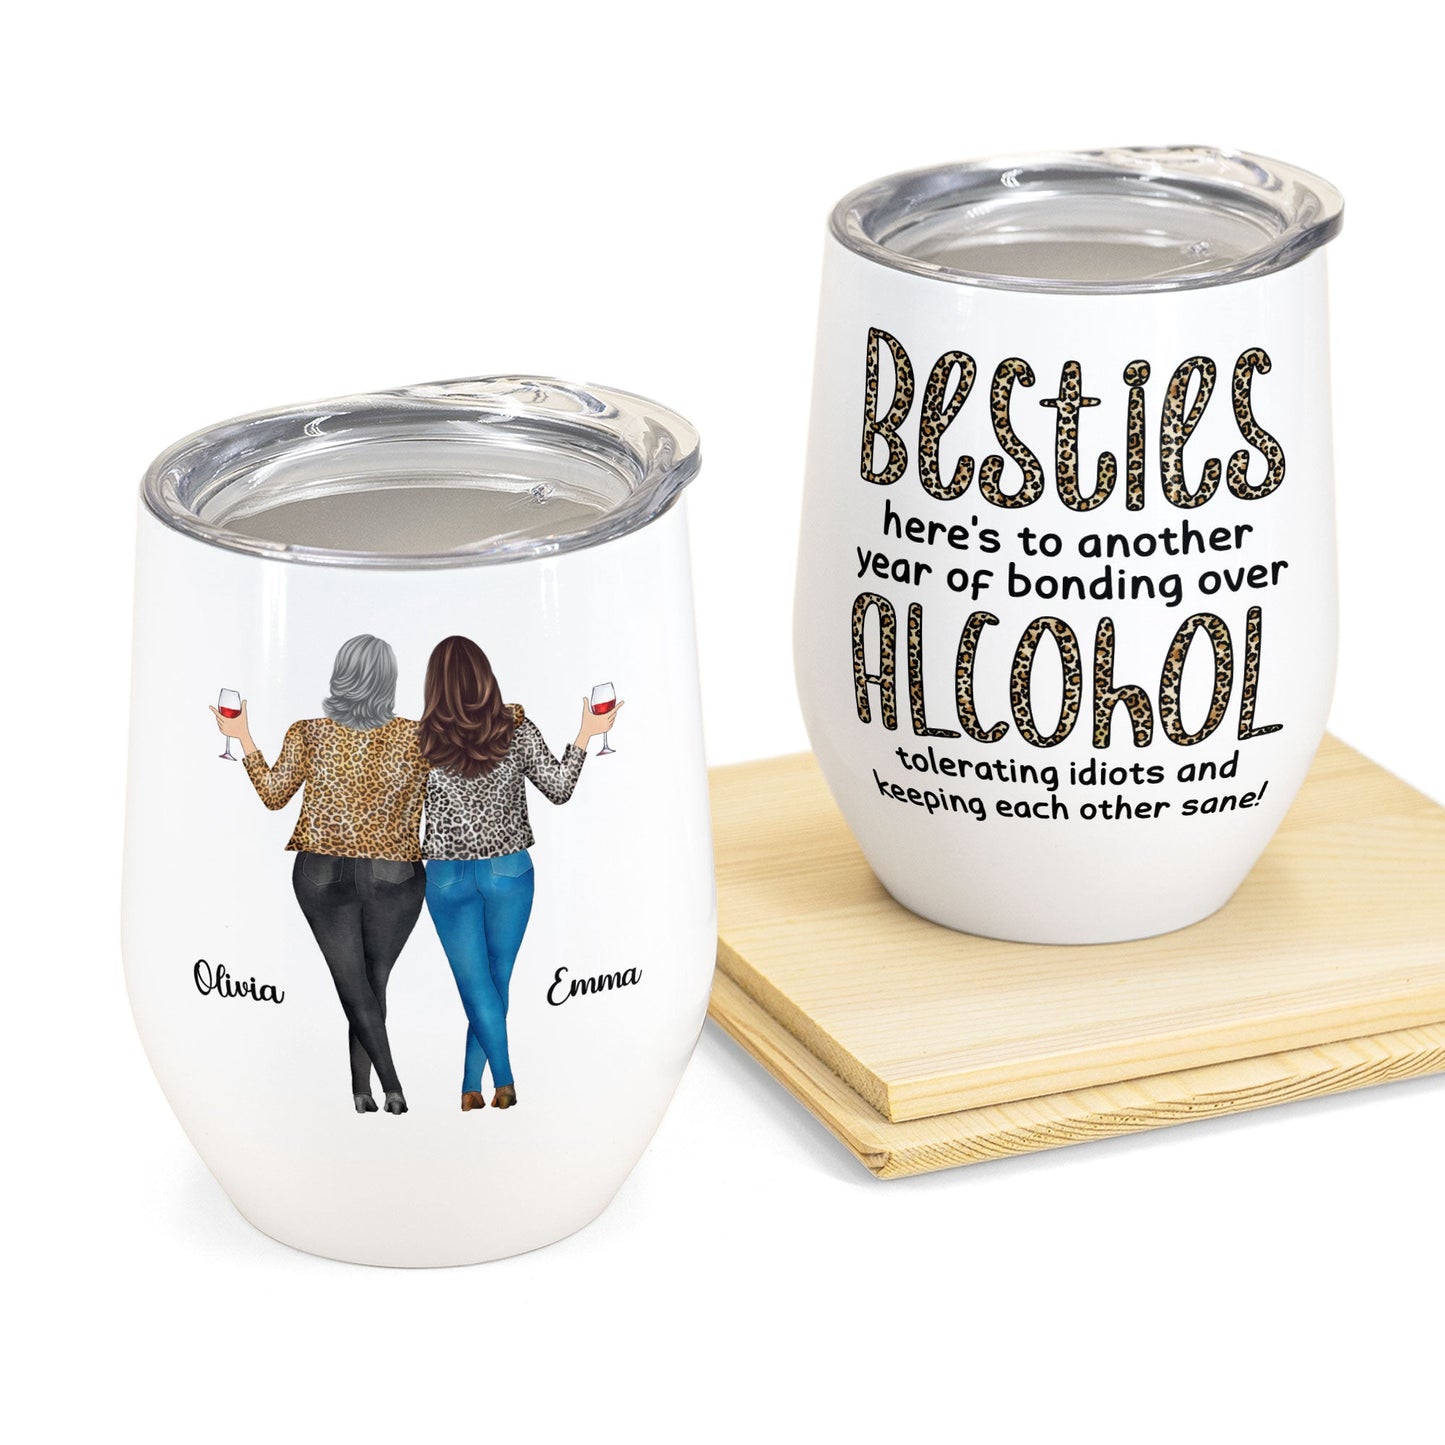 https://macorner.co/cdn/shop/products/Besties-Alcohol-Tolerating-Bonding-Over-Keeping-Each-Other-Sane--Personalized-Wine-Tumbler-Birthday-New-Year-Gift-For-Besties-Soul-Sisters-Sistas-BFF-Friends-Leopard-Pattern-Jacket-Wo.jpg?v=1639972748&width=1445